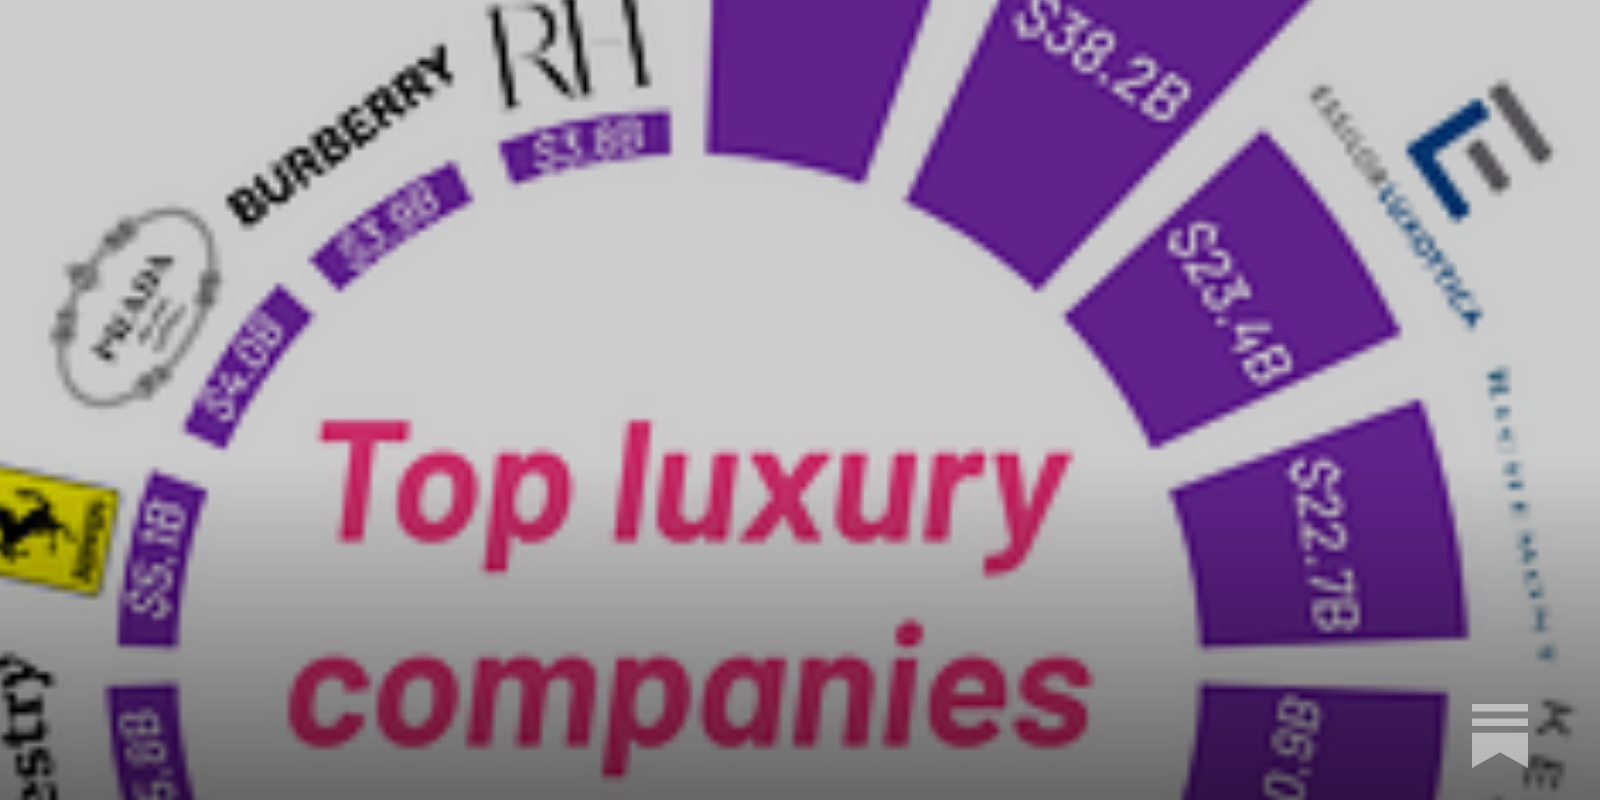 8 new charts on luxury stocks - part 2 - by Truman